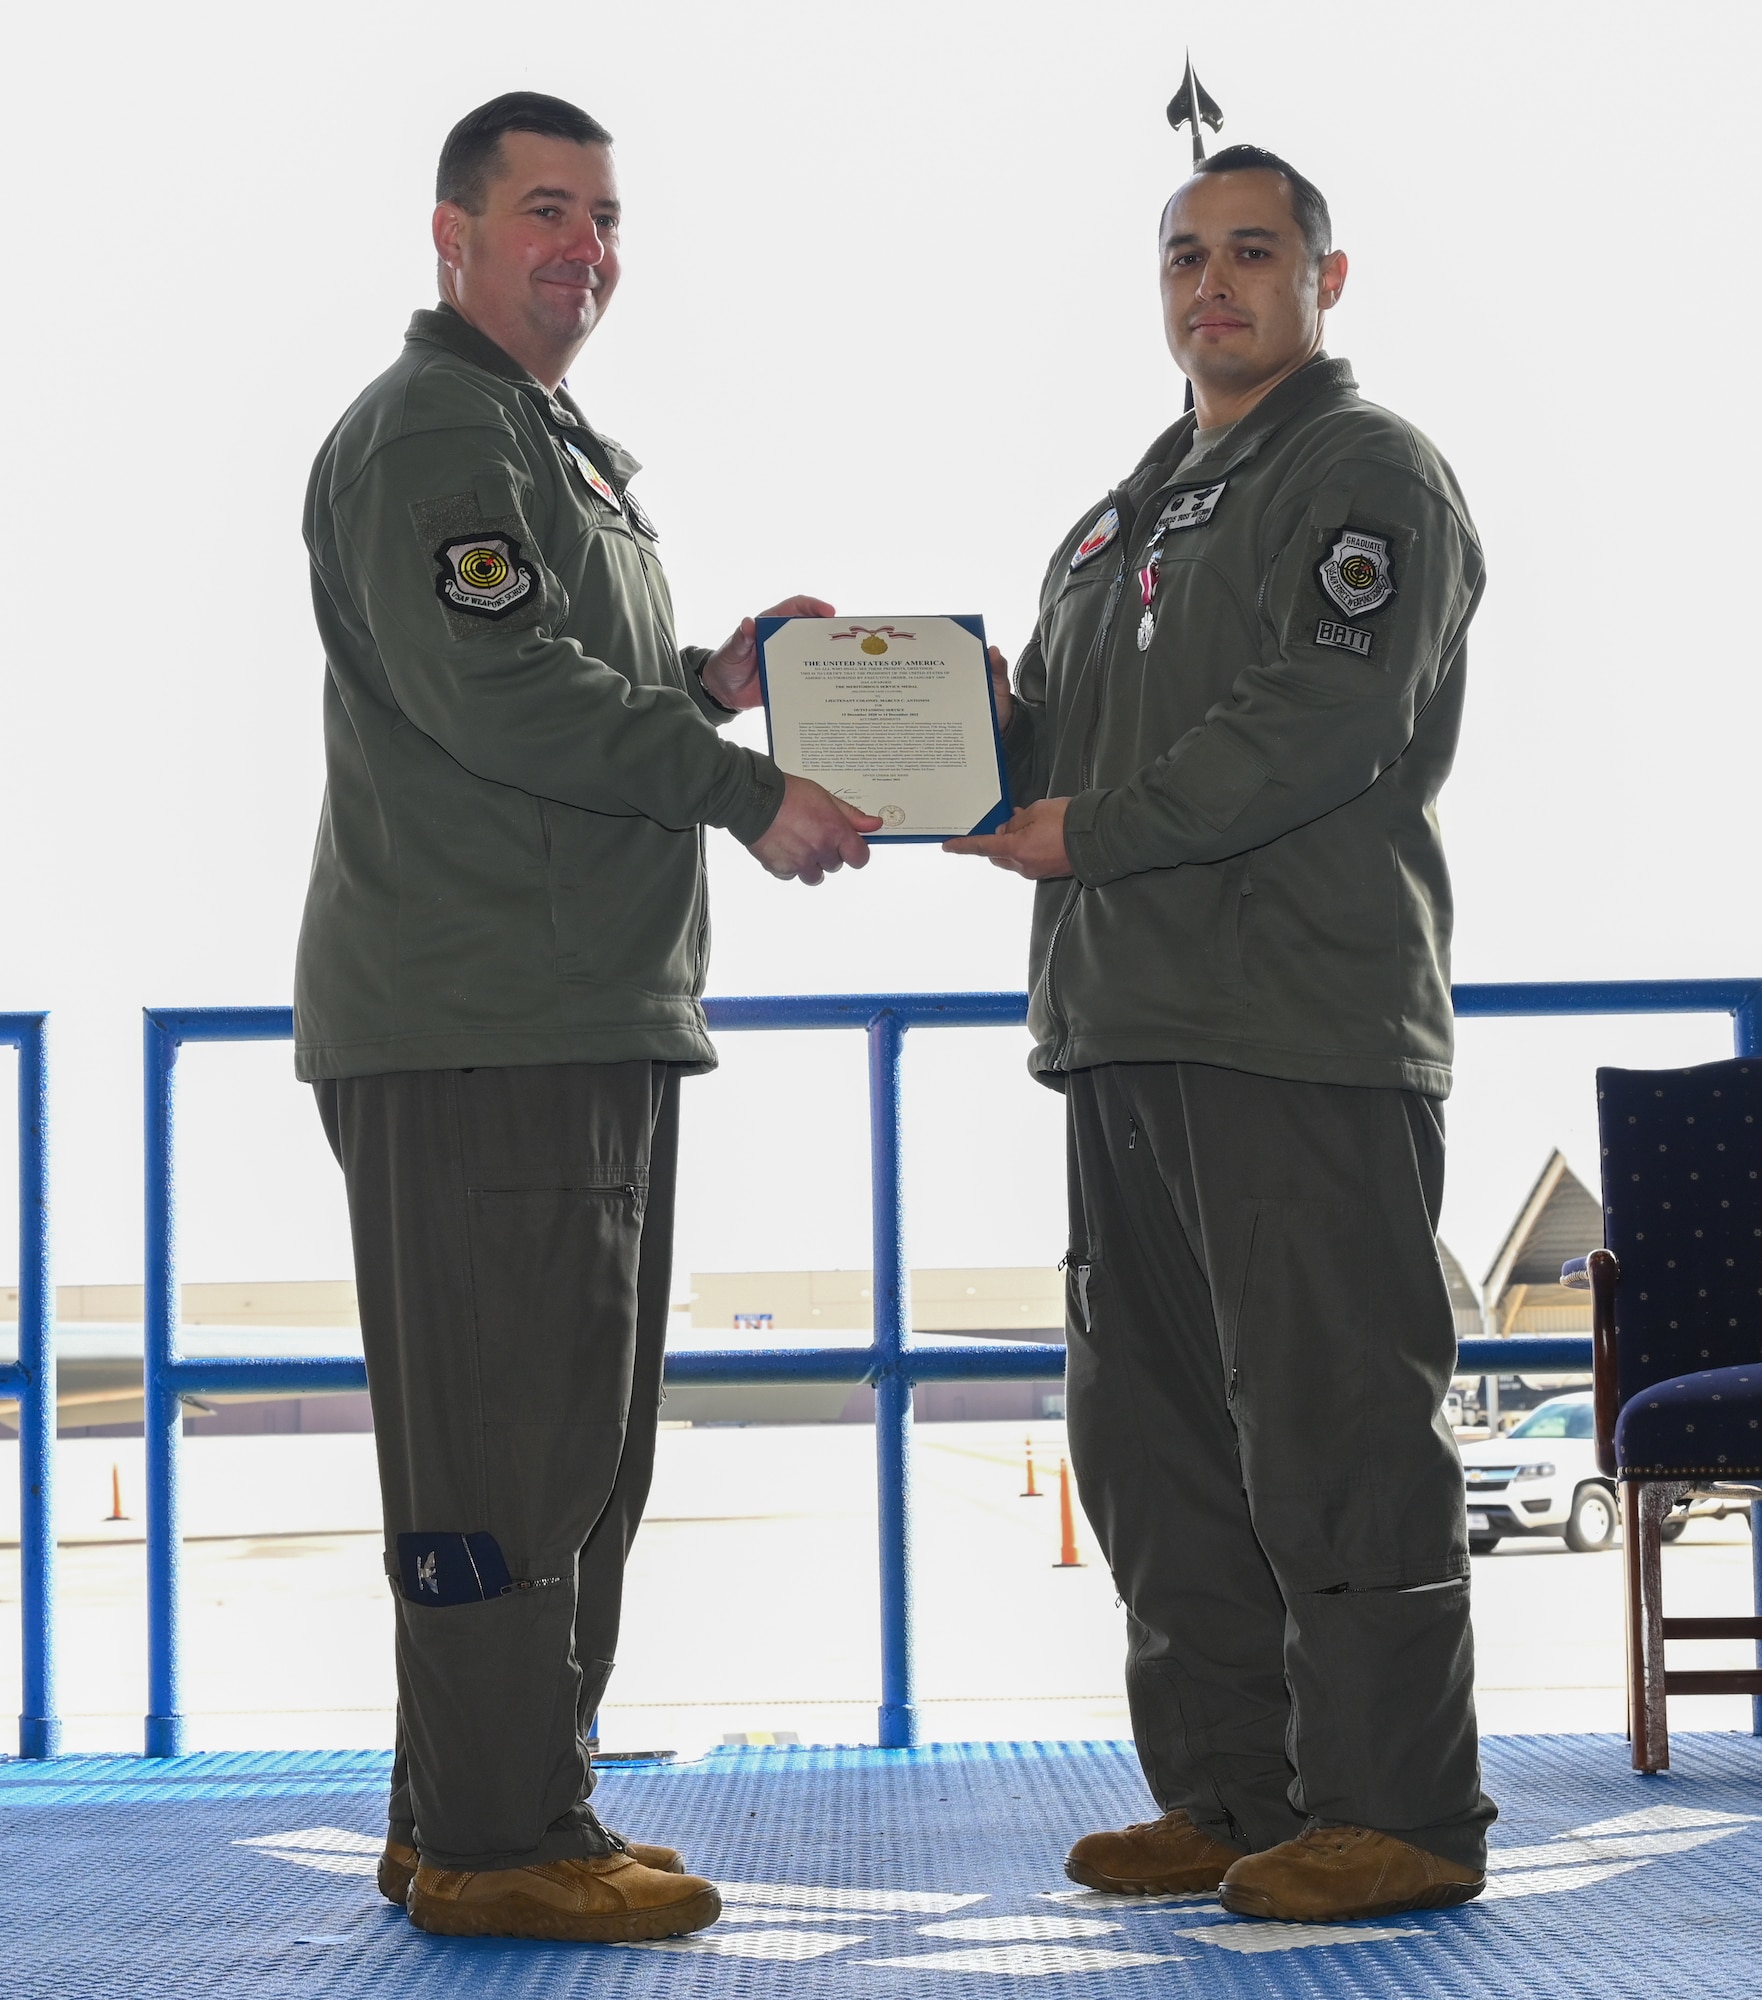 Lt. Col. Marcus Antonini, previous 325th Weapons Squadron, 57th Wing (right), and Col. Daniel Lehoski, United States Air Force Weapons School Commandant (left), pose with the Meritorious Service Medal certificate at Whiteman Air Force Base, Missouri, December 14, 2022. Change of commands are a military tradition of passing command from one commanding officer to another. (U.S. Air Force photo by Airman 1st Class Joseph Garcia)